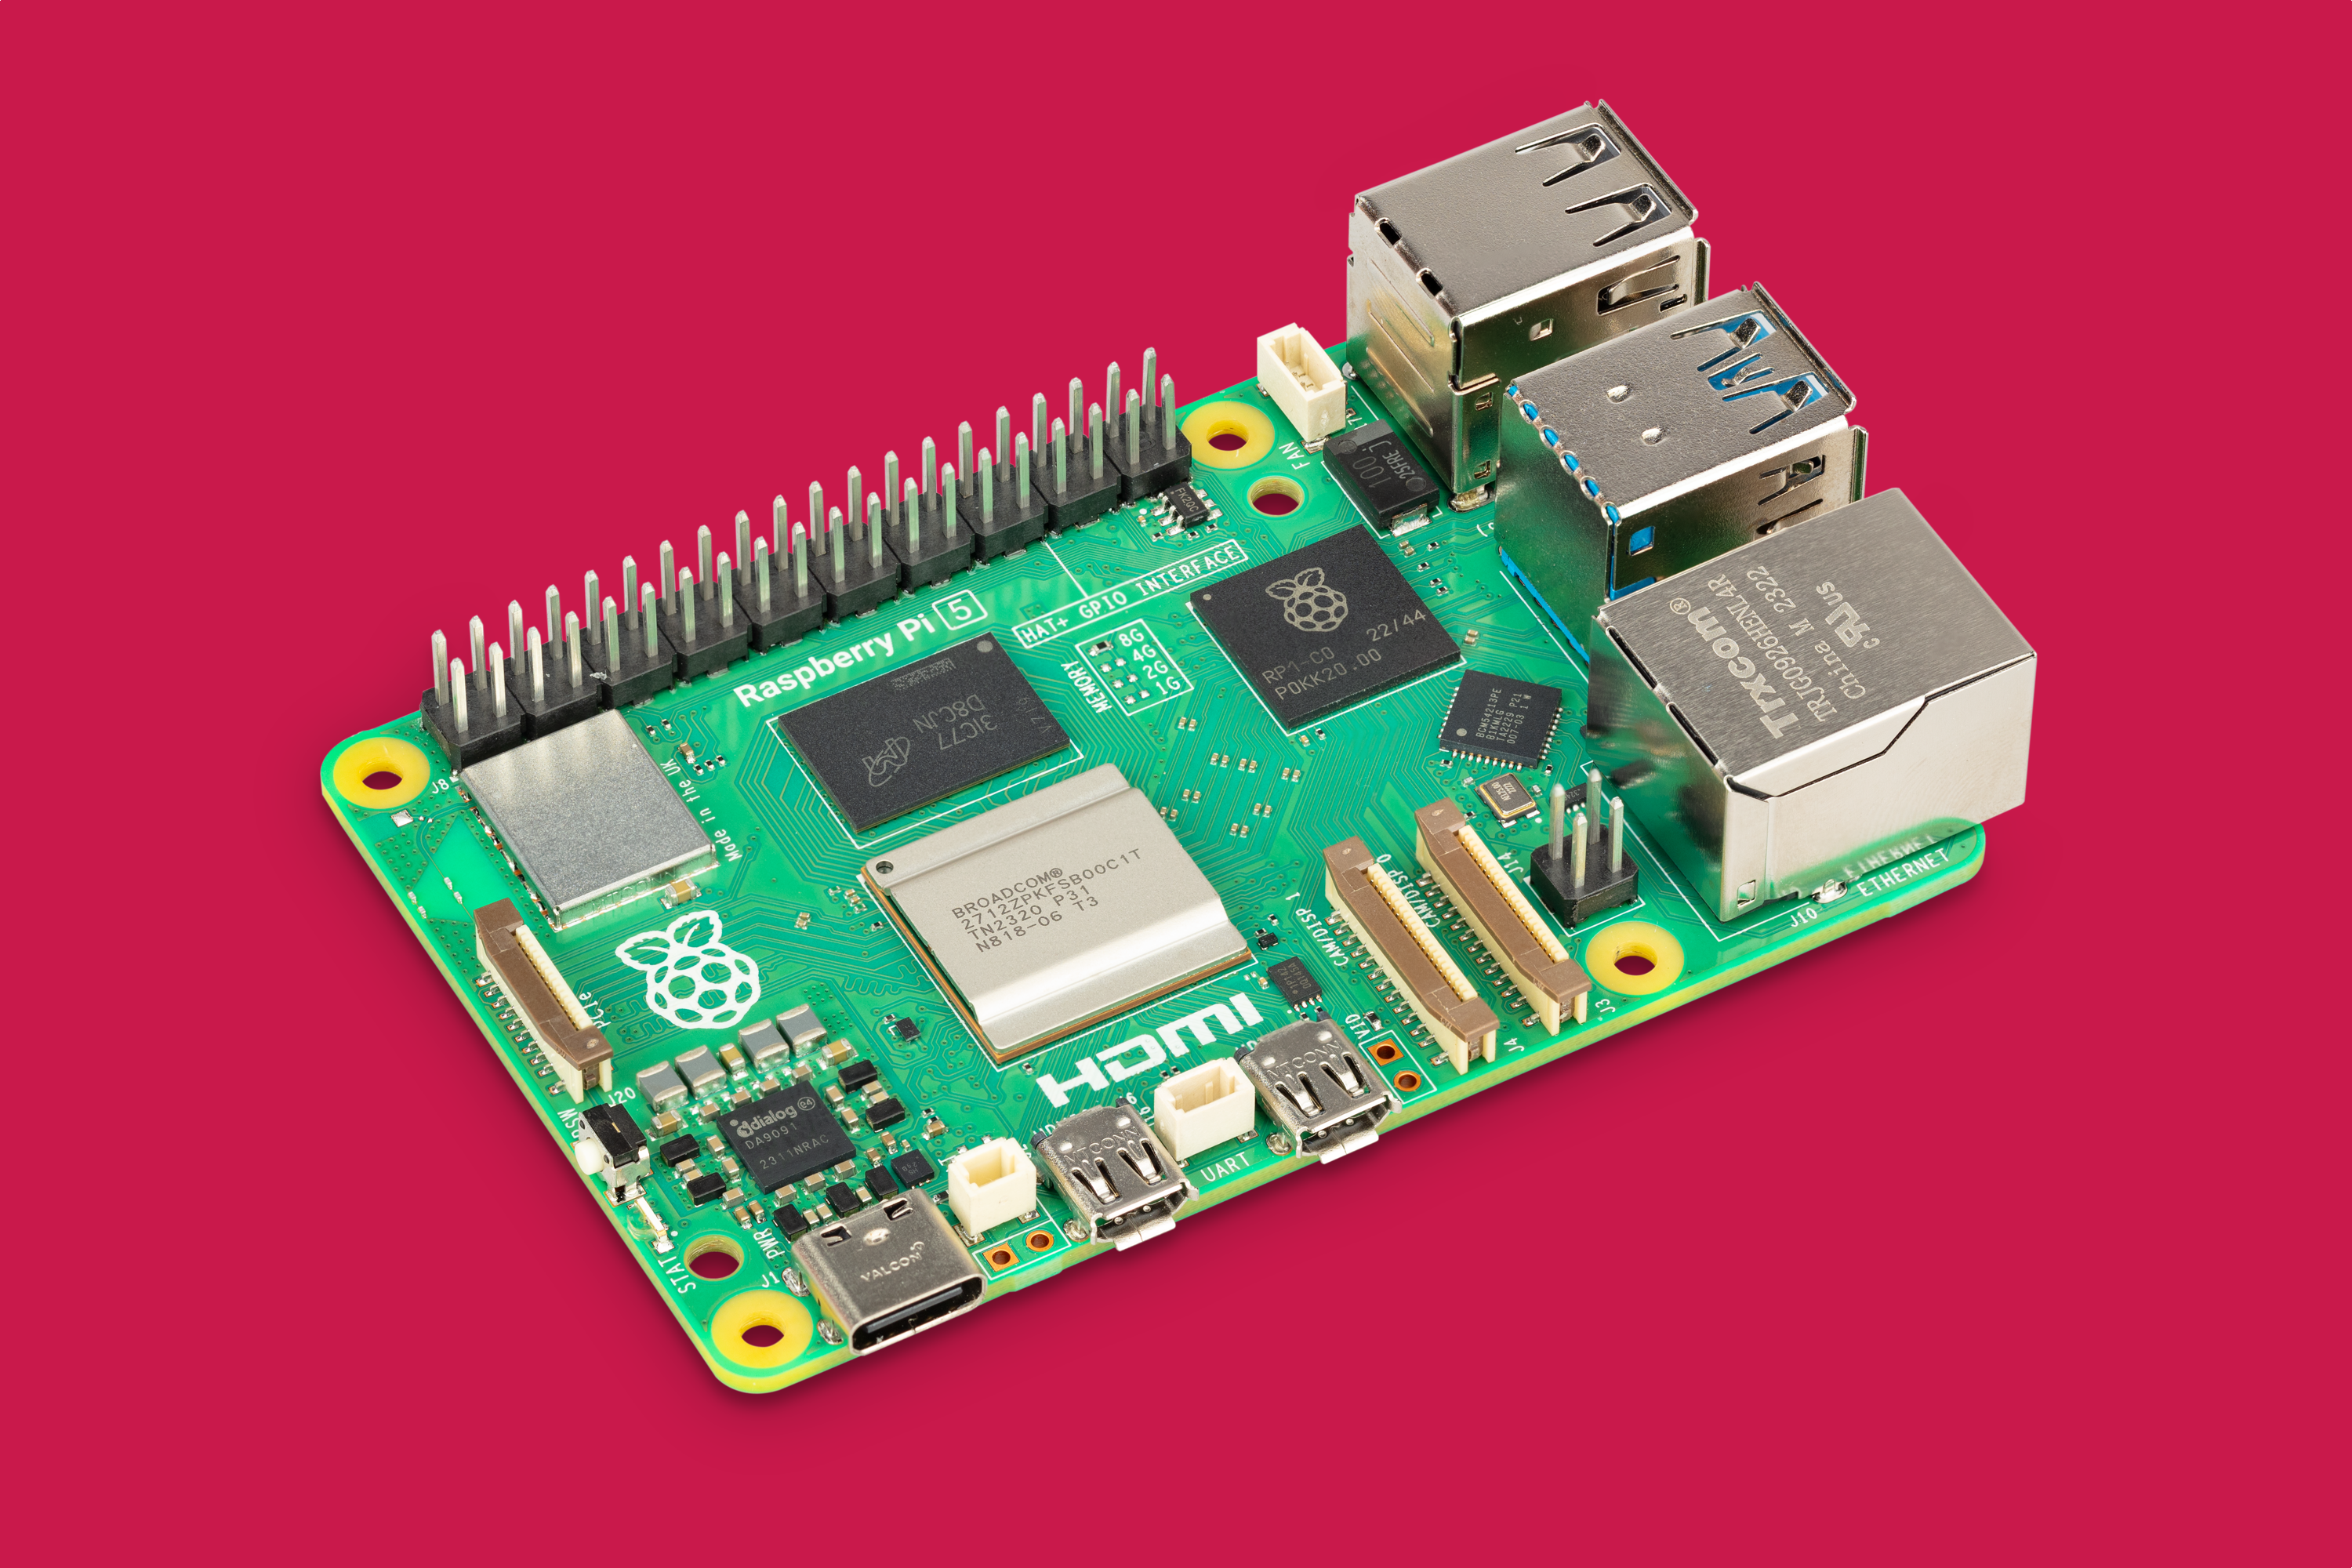 Fresh From the Oven: Pi for Your Desktop - IEEE Spectrum